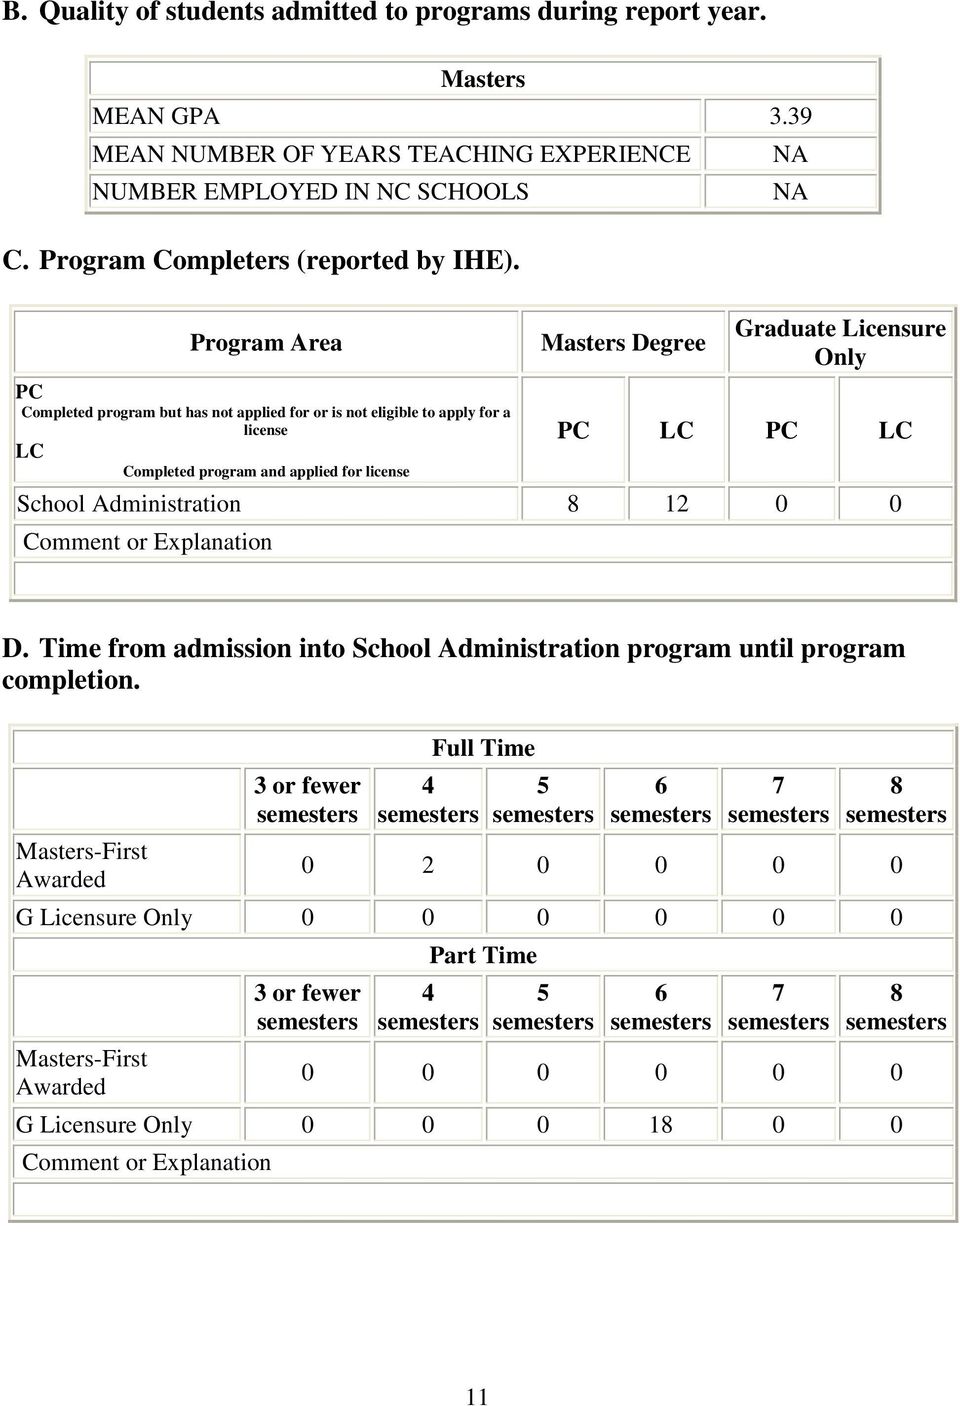 Program Area PC Completed program but has not applied for or is not eligible to apply for a license LC Completed program and applied for license Masters Degree Graduate Licensure Only PC